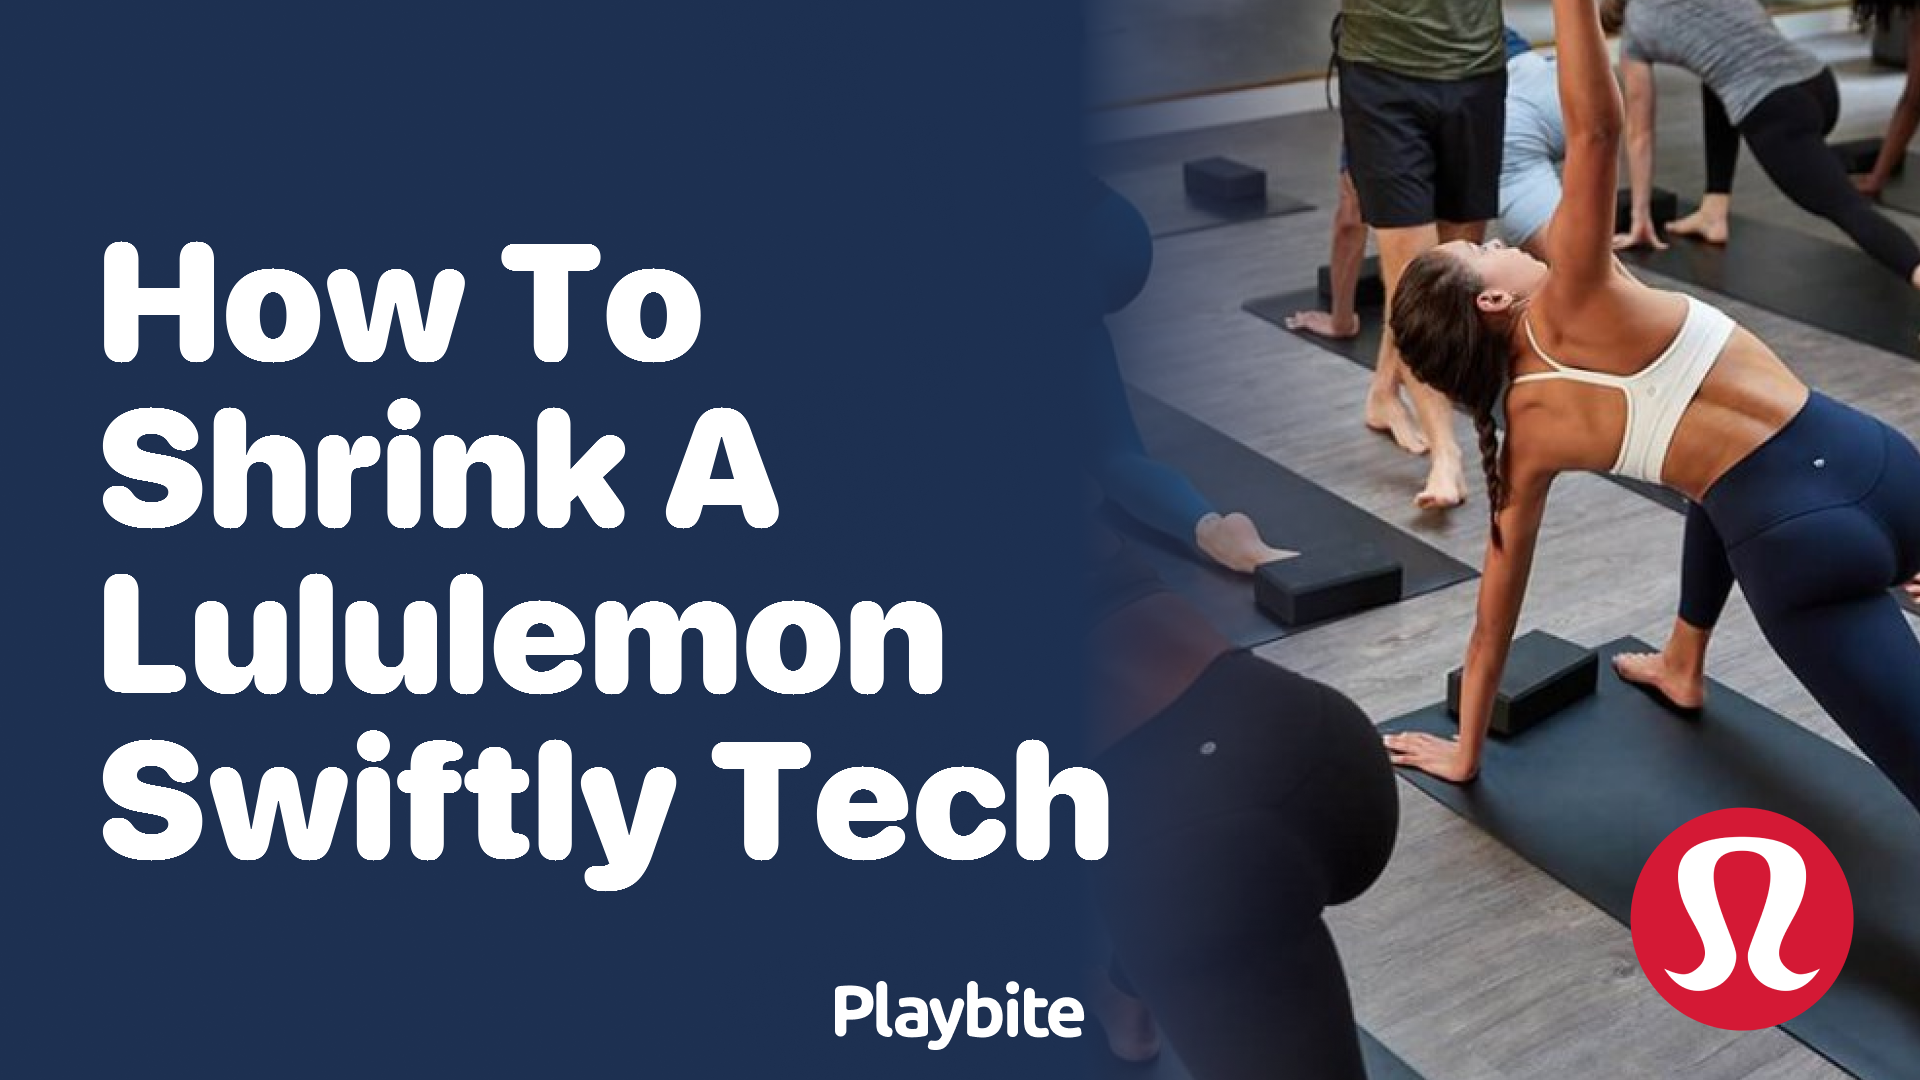 How to Shrink a Lululemon Swiftly Tech Shirt: A Quick Guide